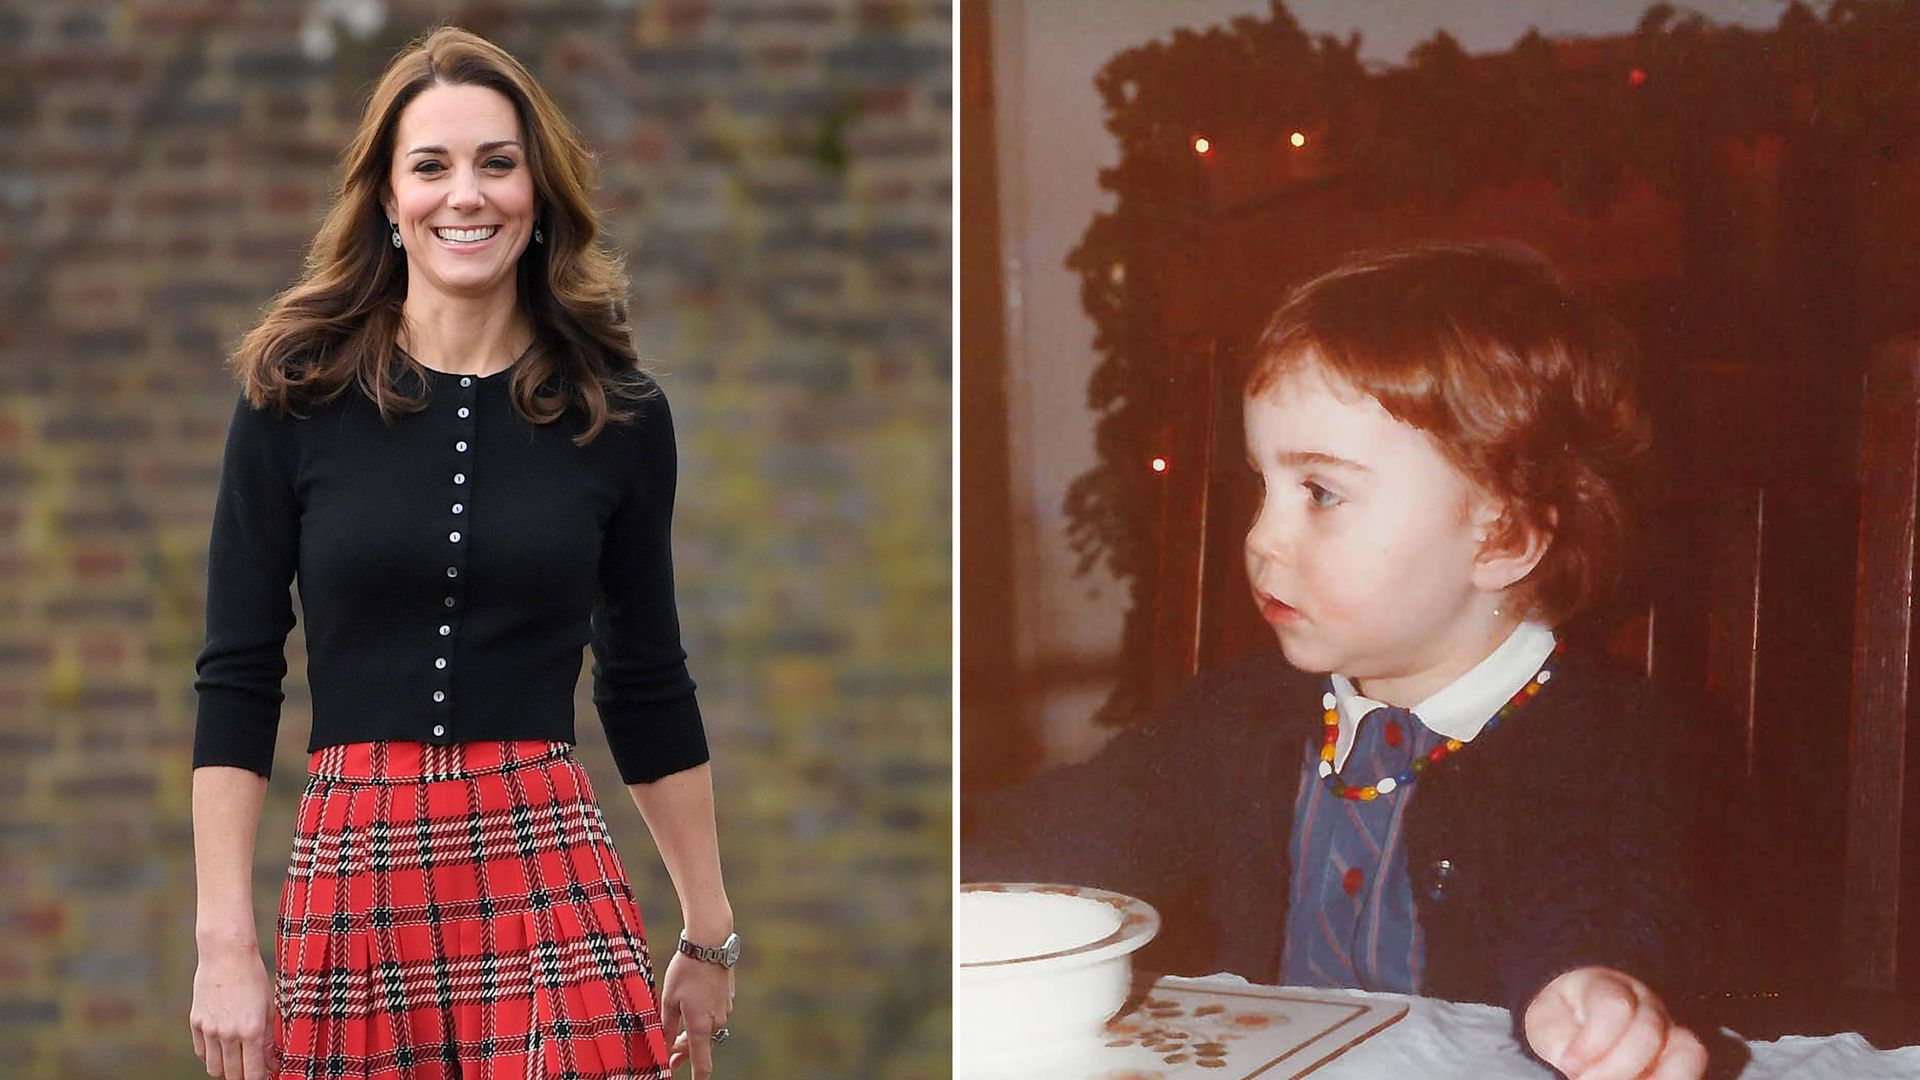 Kate Middleton released a photo of herself at Christmas in 1983